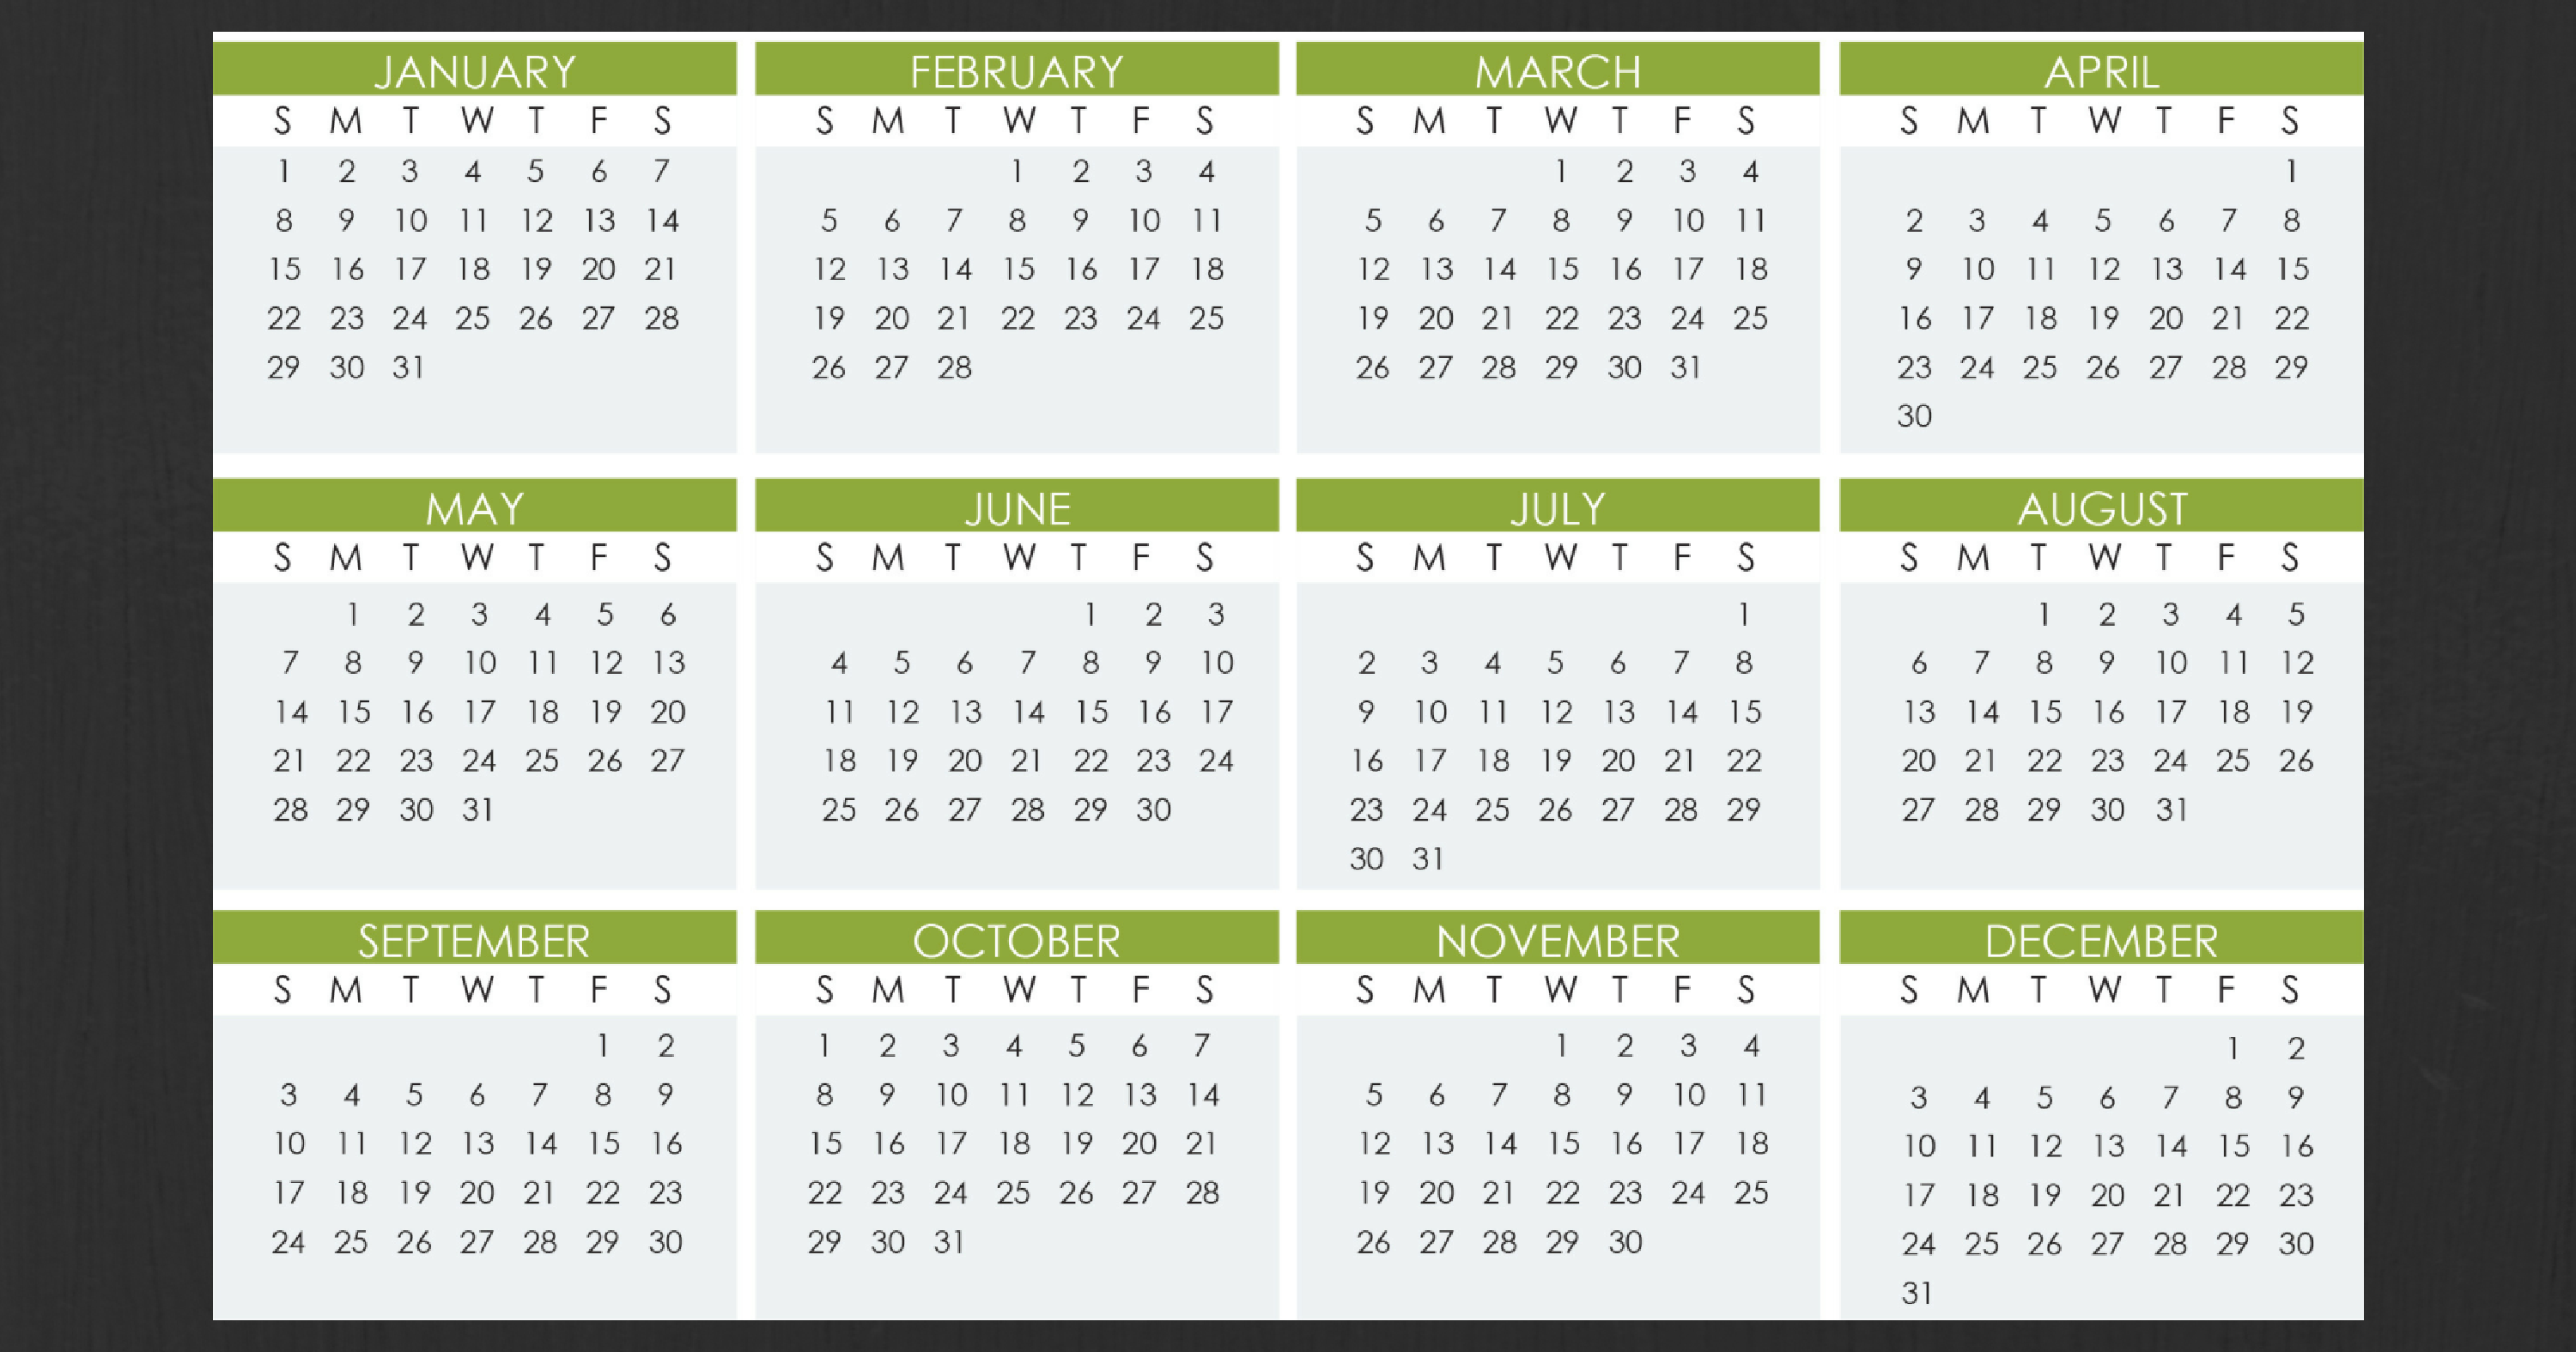 Stay Organized Next Year with Our 2017 Calendar and Tax Deadline Guide